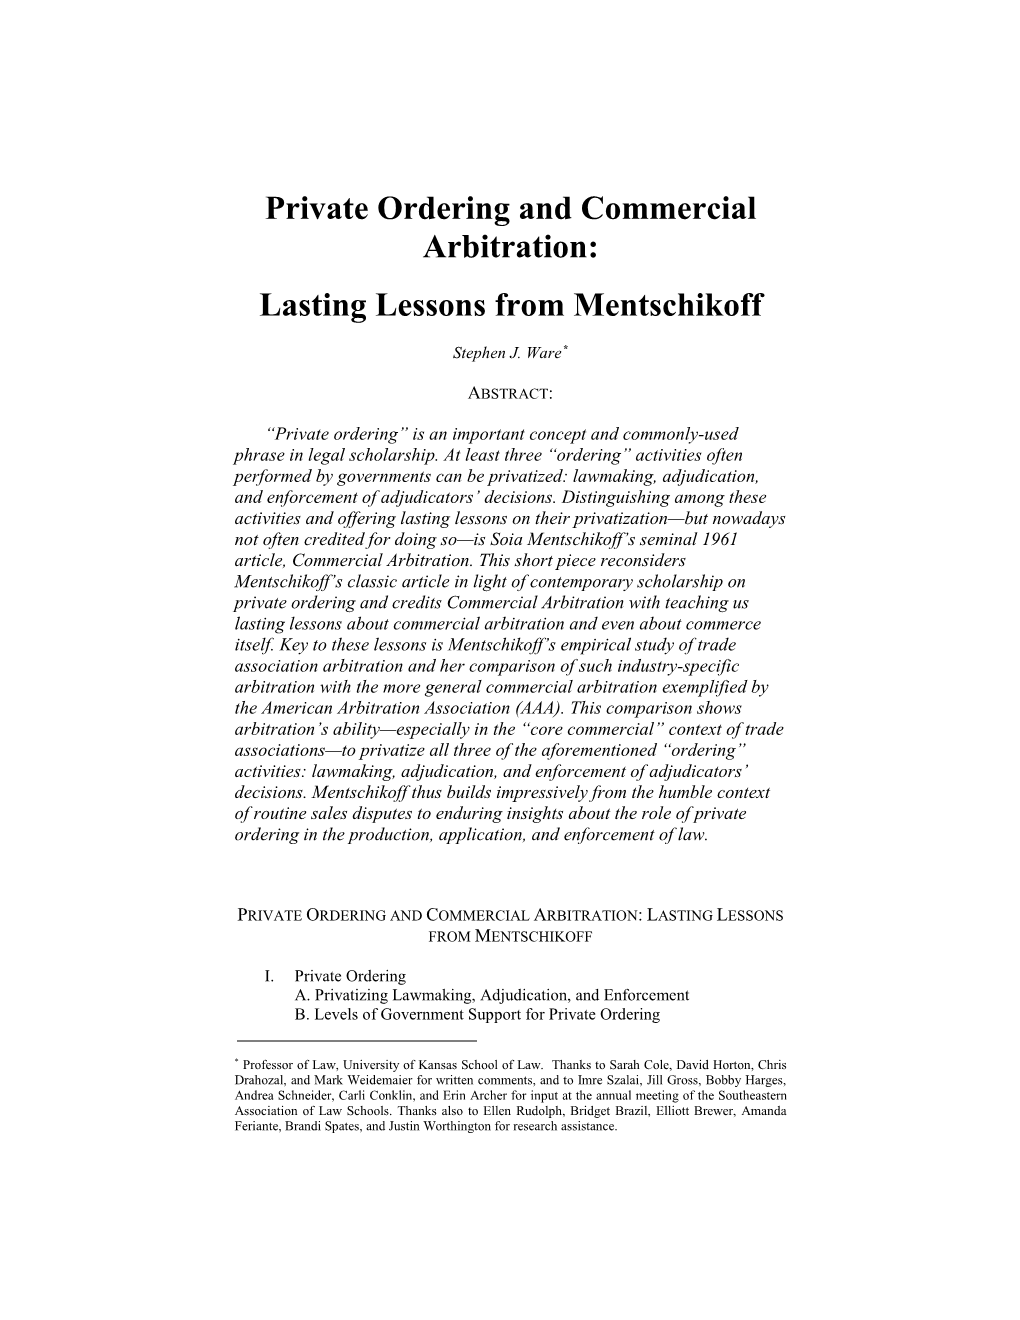 Private Ordering and Commercial Arbitration: Lasting Lessons from Mentschikoff